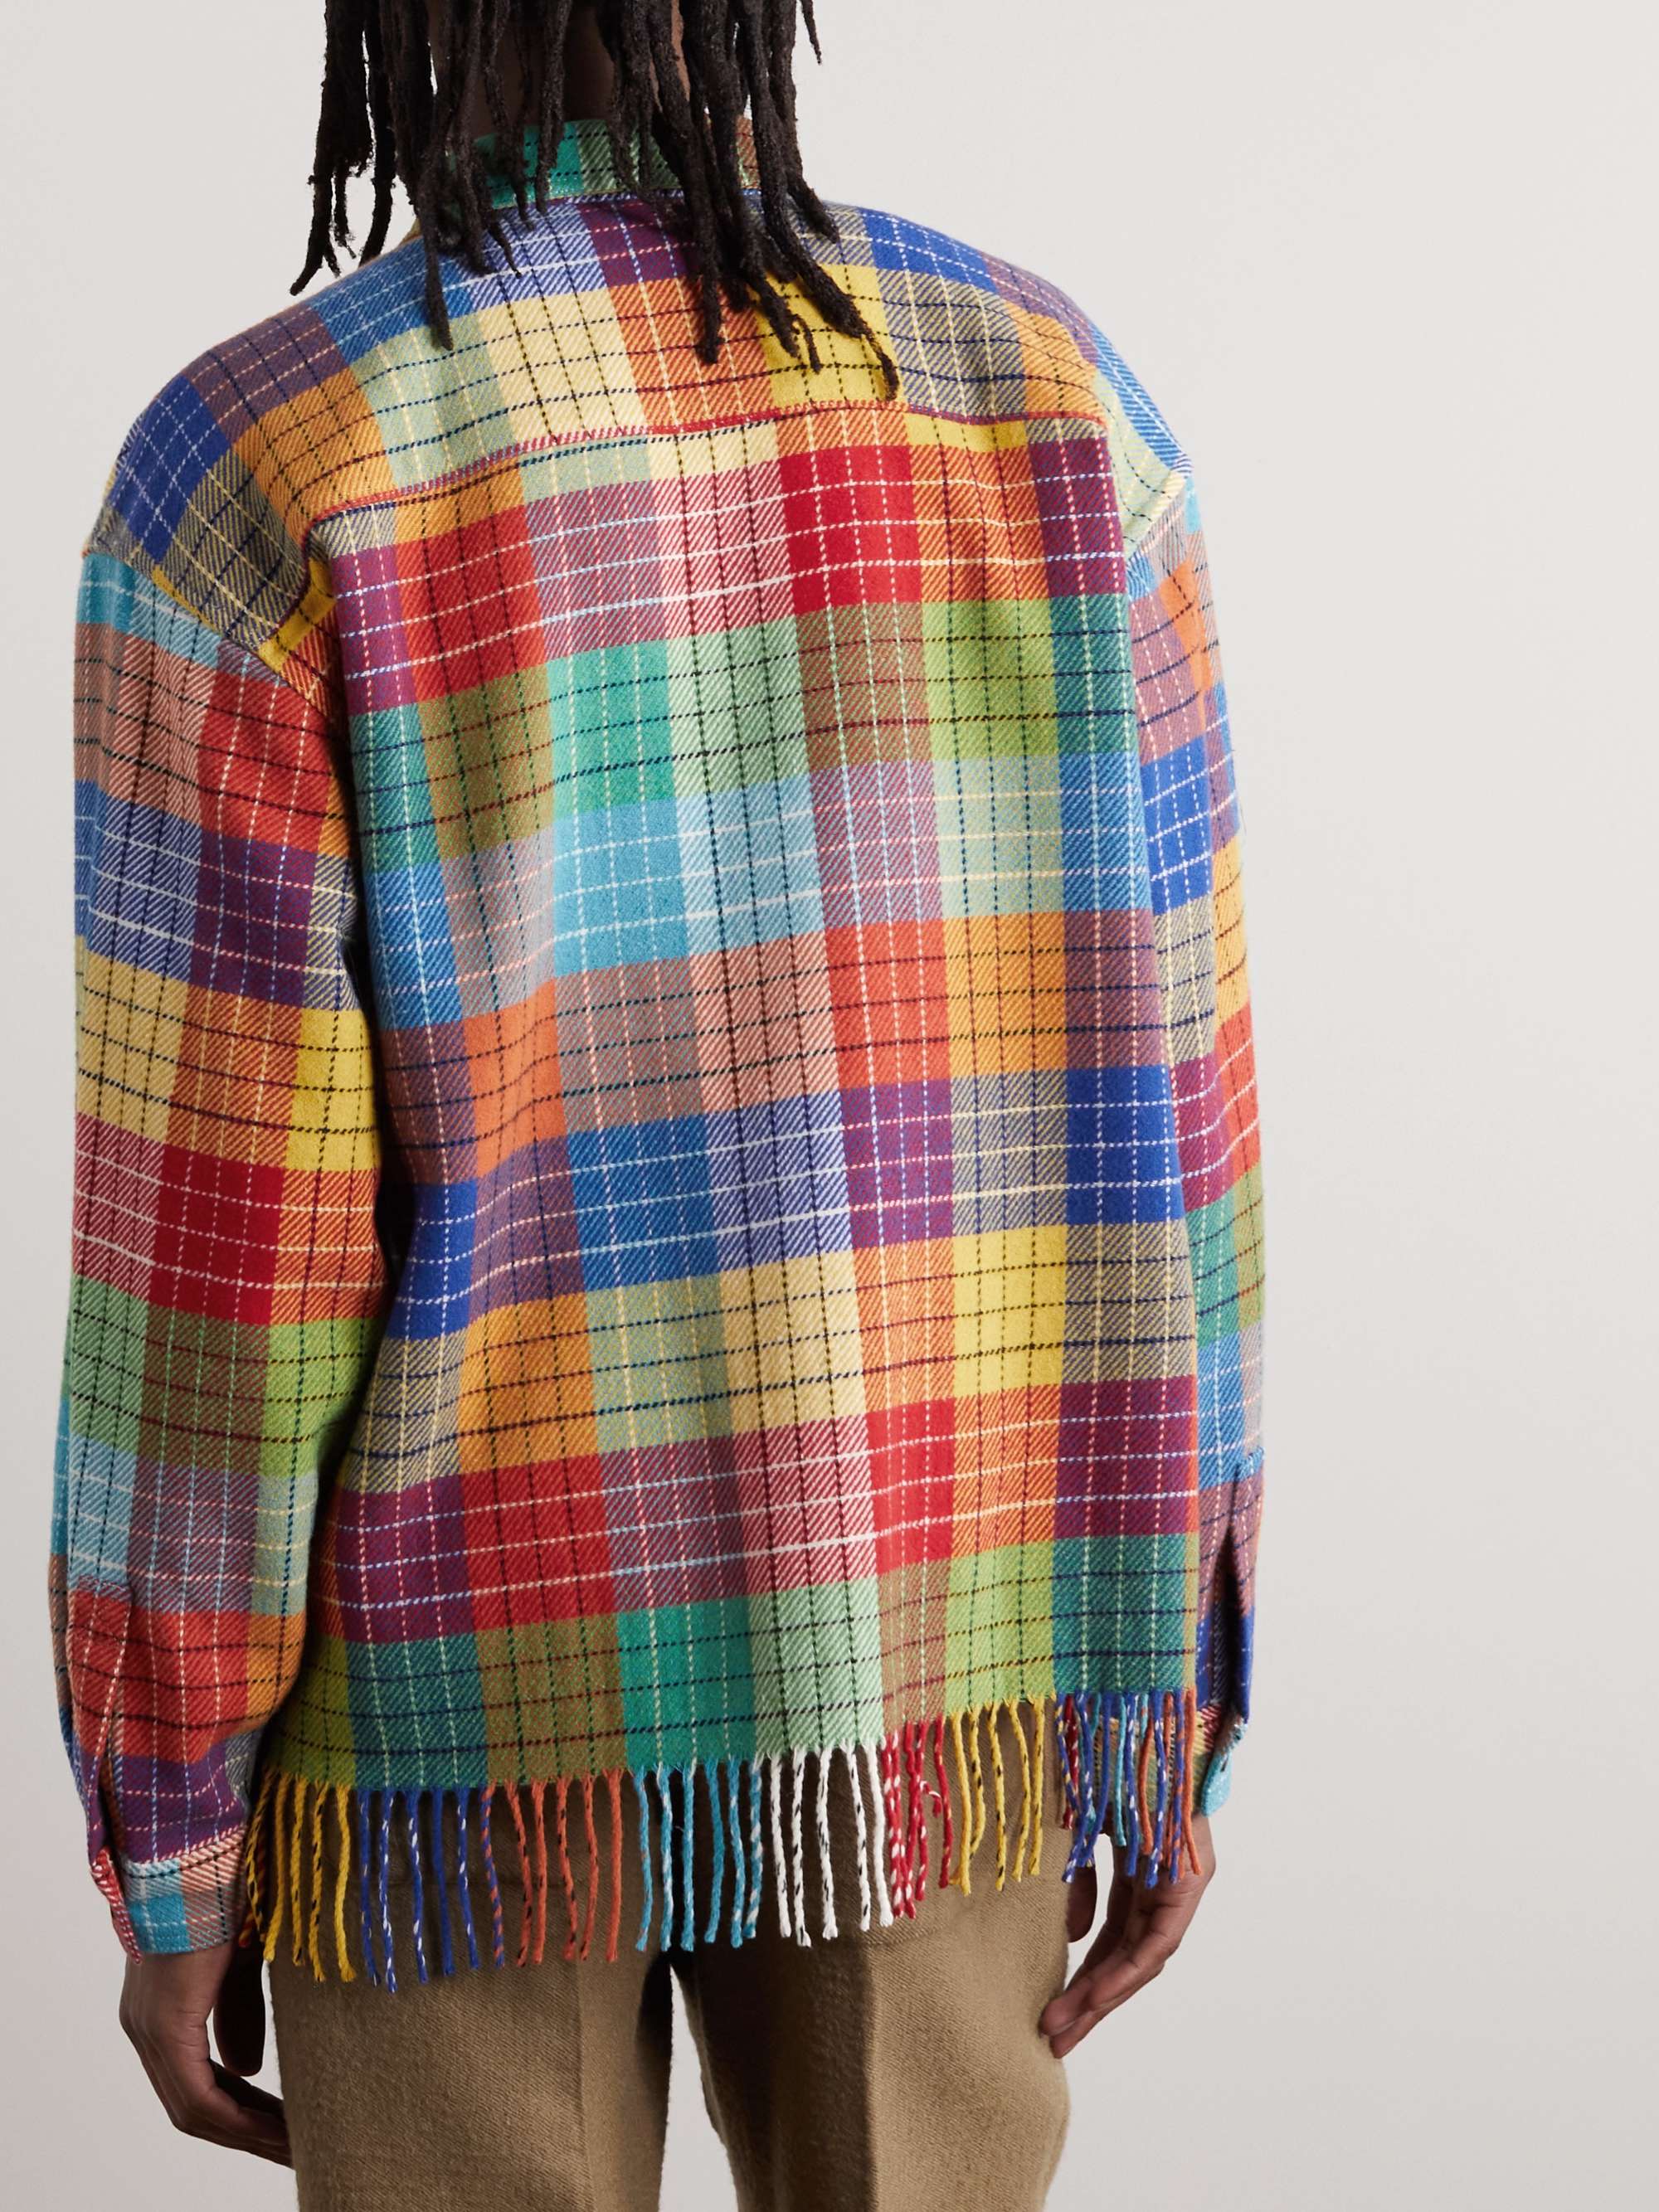 YMC Ryder Fringed Checked Flannel Overshirt